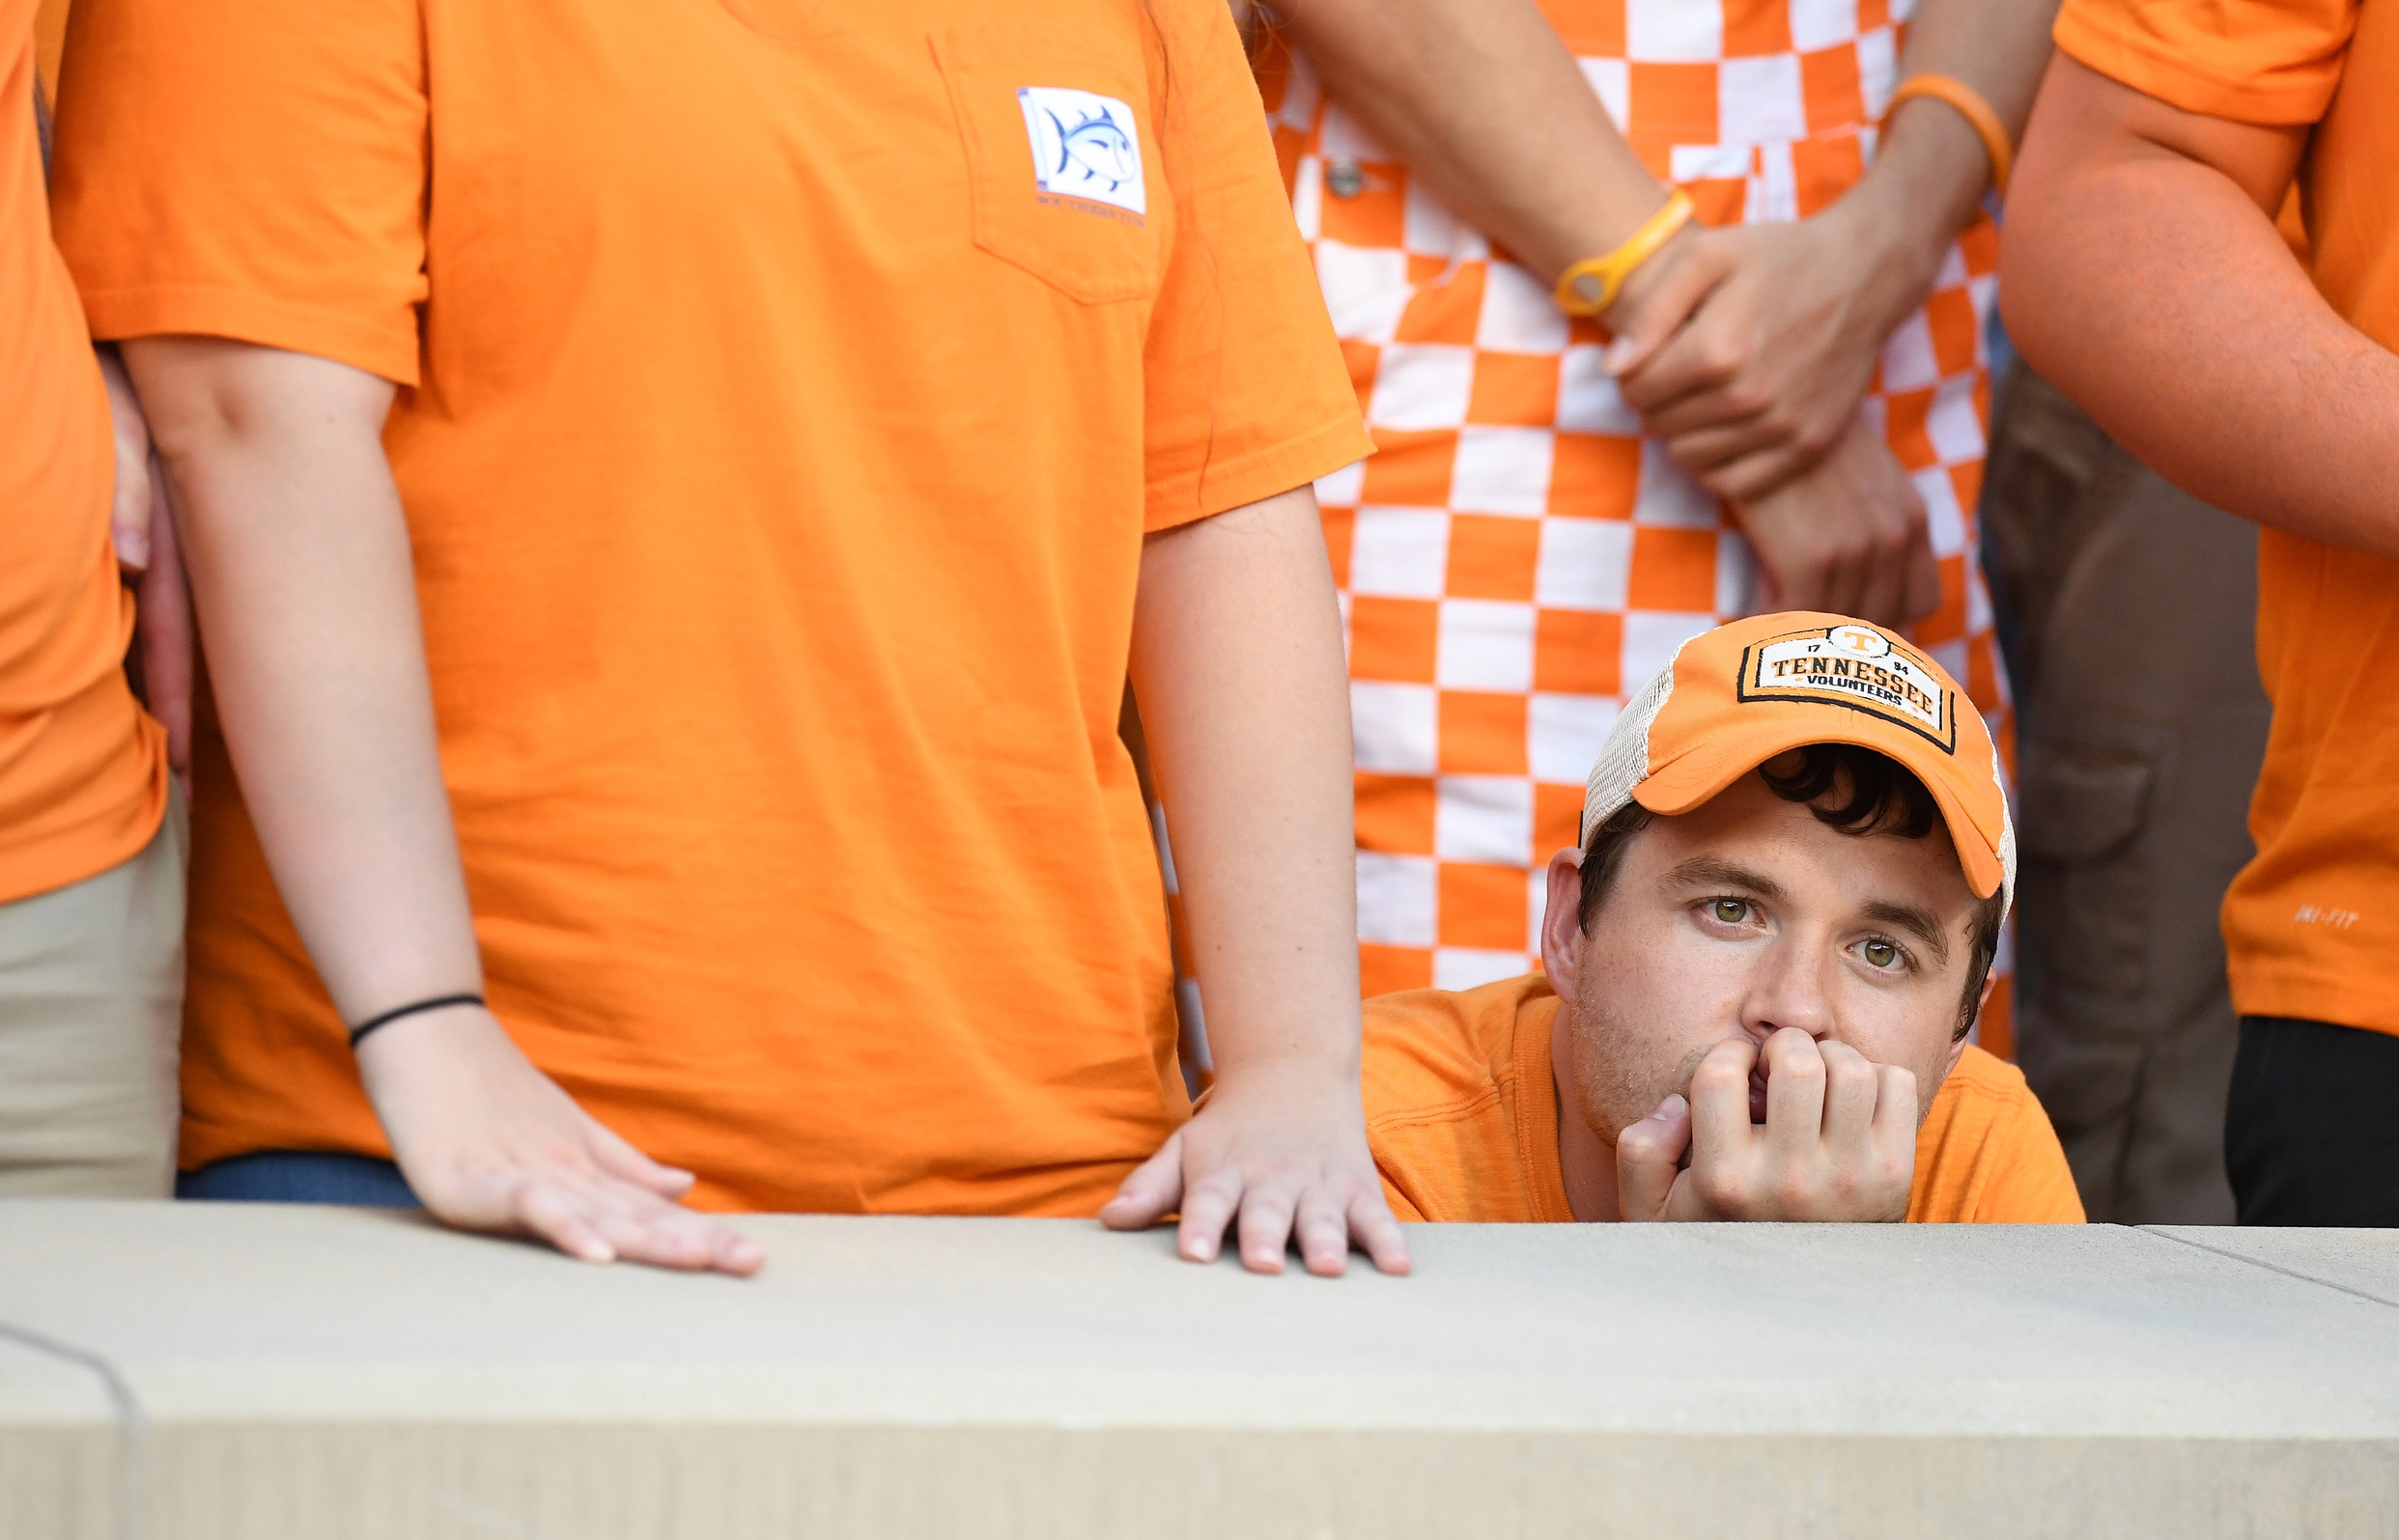 Oct 15, 2016; Knoxville, TN, USA; against the Tennessee Volunteers during the third quarter at Neyland Stadium. Mandatory Credit: John David Mercer-USA TODAY Sports